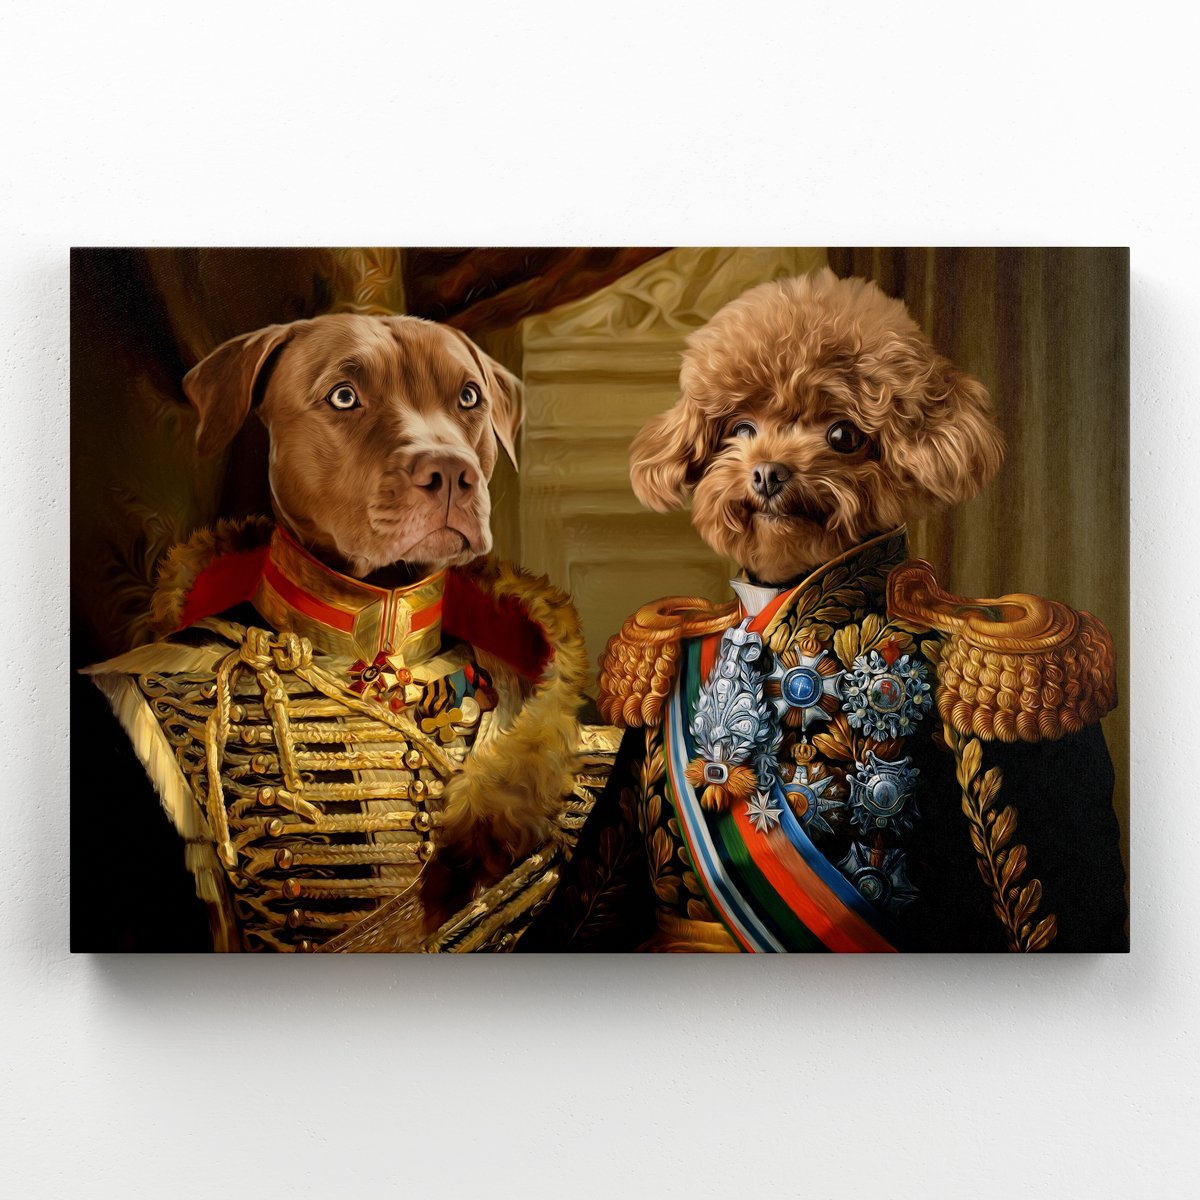 The Brothers In Arms: Custom Pet Canvas - Paw & Glory - #pet portraits# - #dog portraits# - #pet portraits uk#pawandglory, pet art canvas,dog canvas, personalized dog and owner canvas uk, pet canvas uk, canvas of my dog, dog canvas wall art